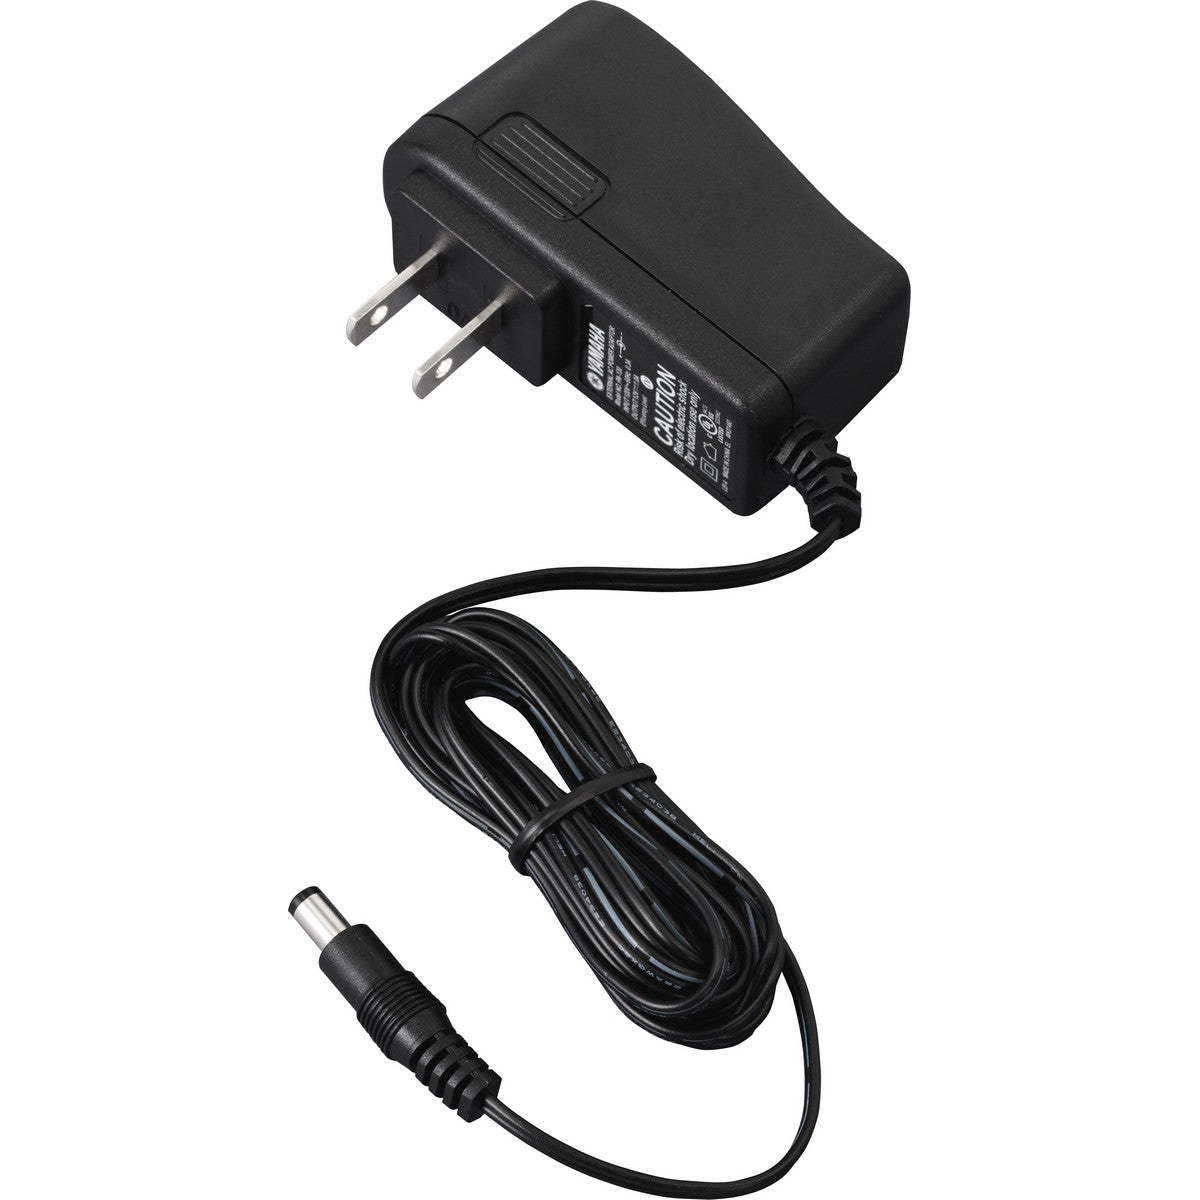 Yamaha PA130 | AC Power Adapter for entry-level Portable Keyboards